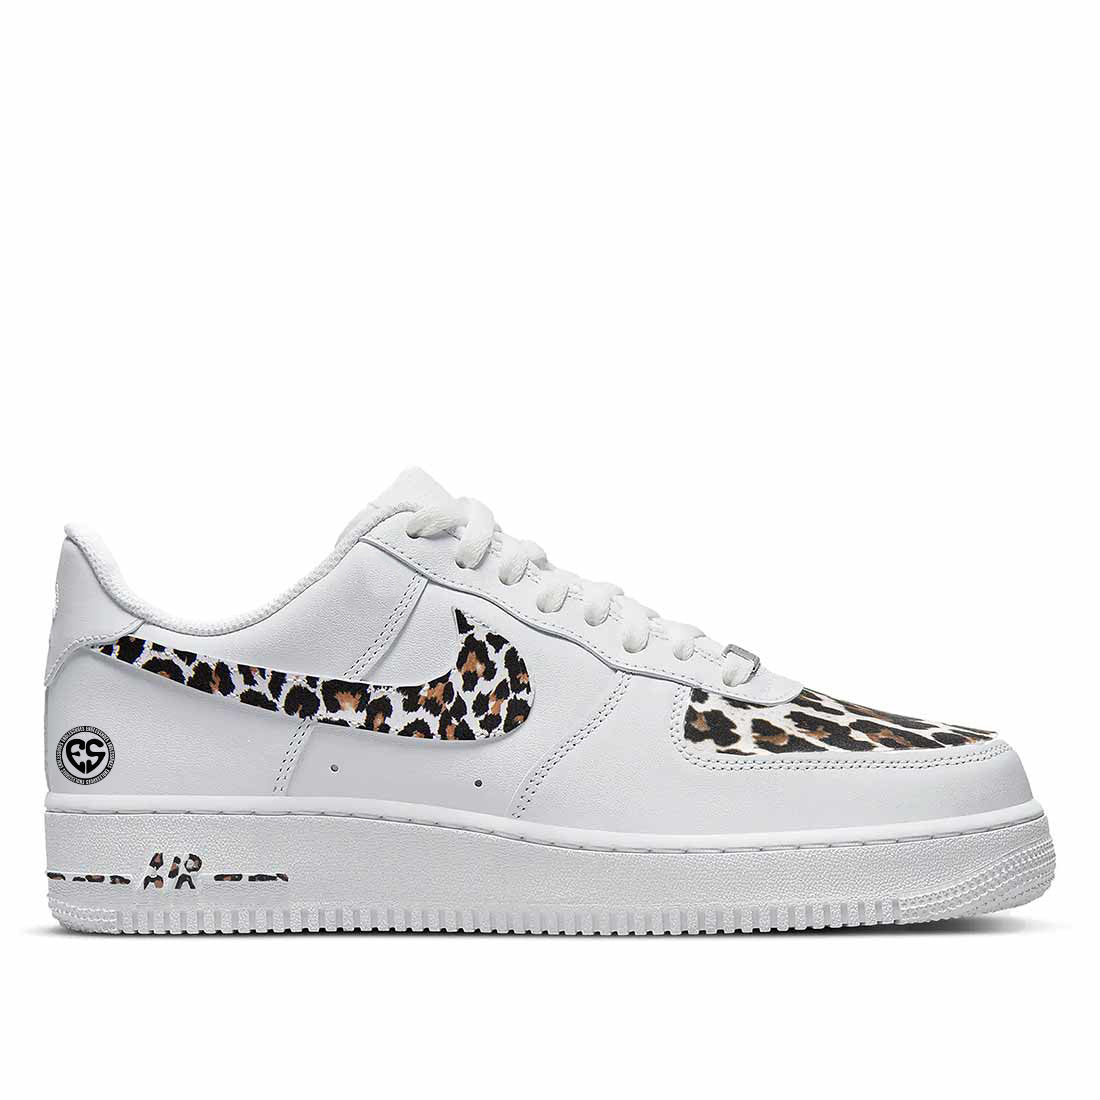 Nike air force 1 bianche con swoosh leopardato